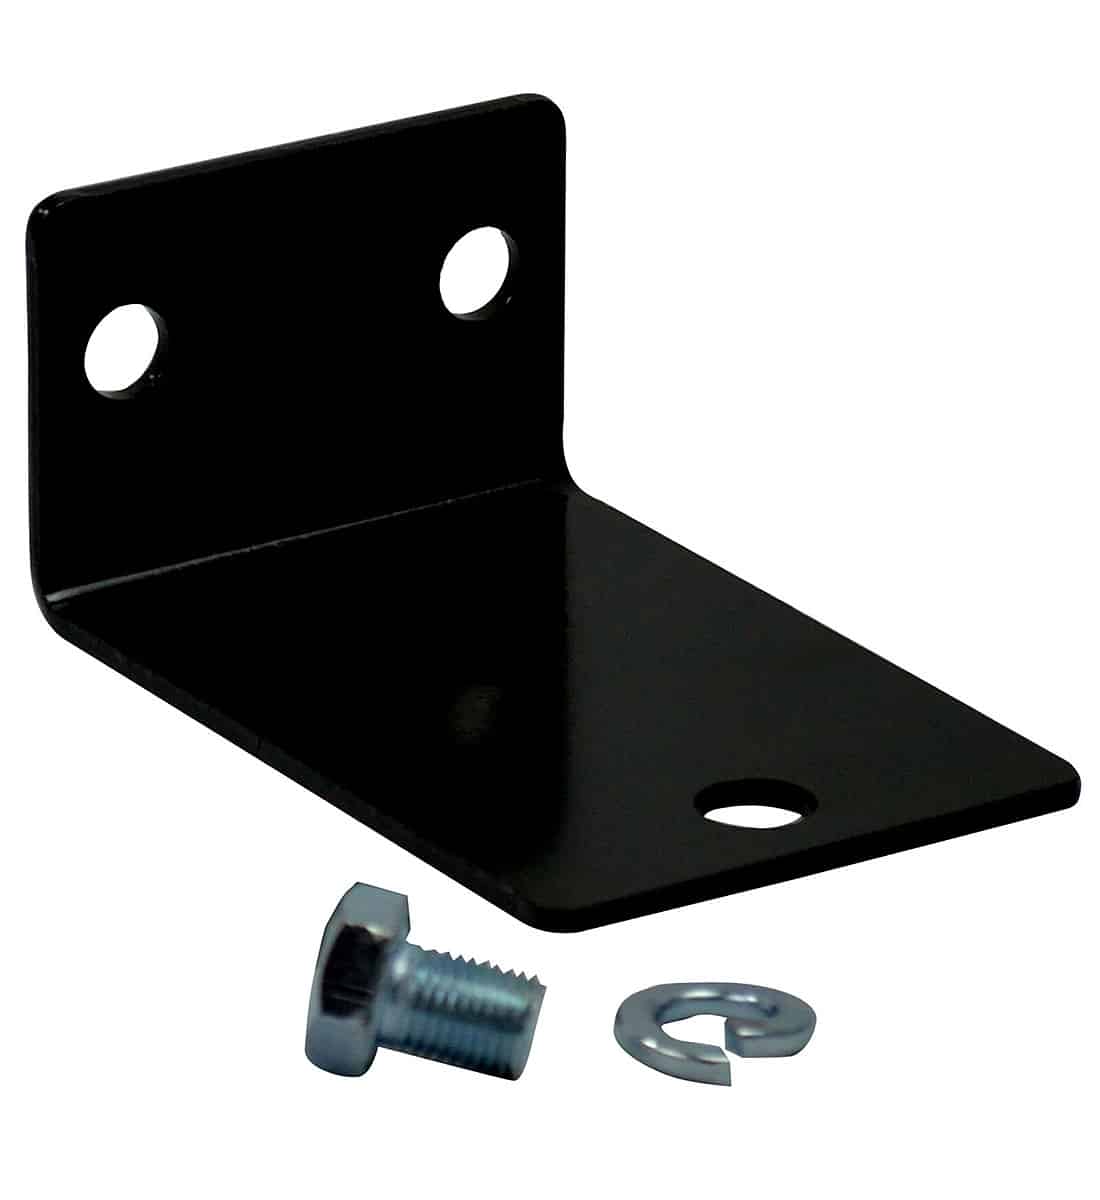 3M Mounting Kit Replacement for AP900 Series